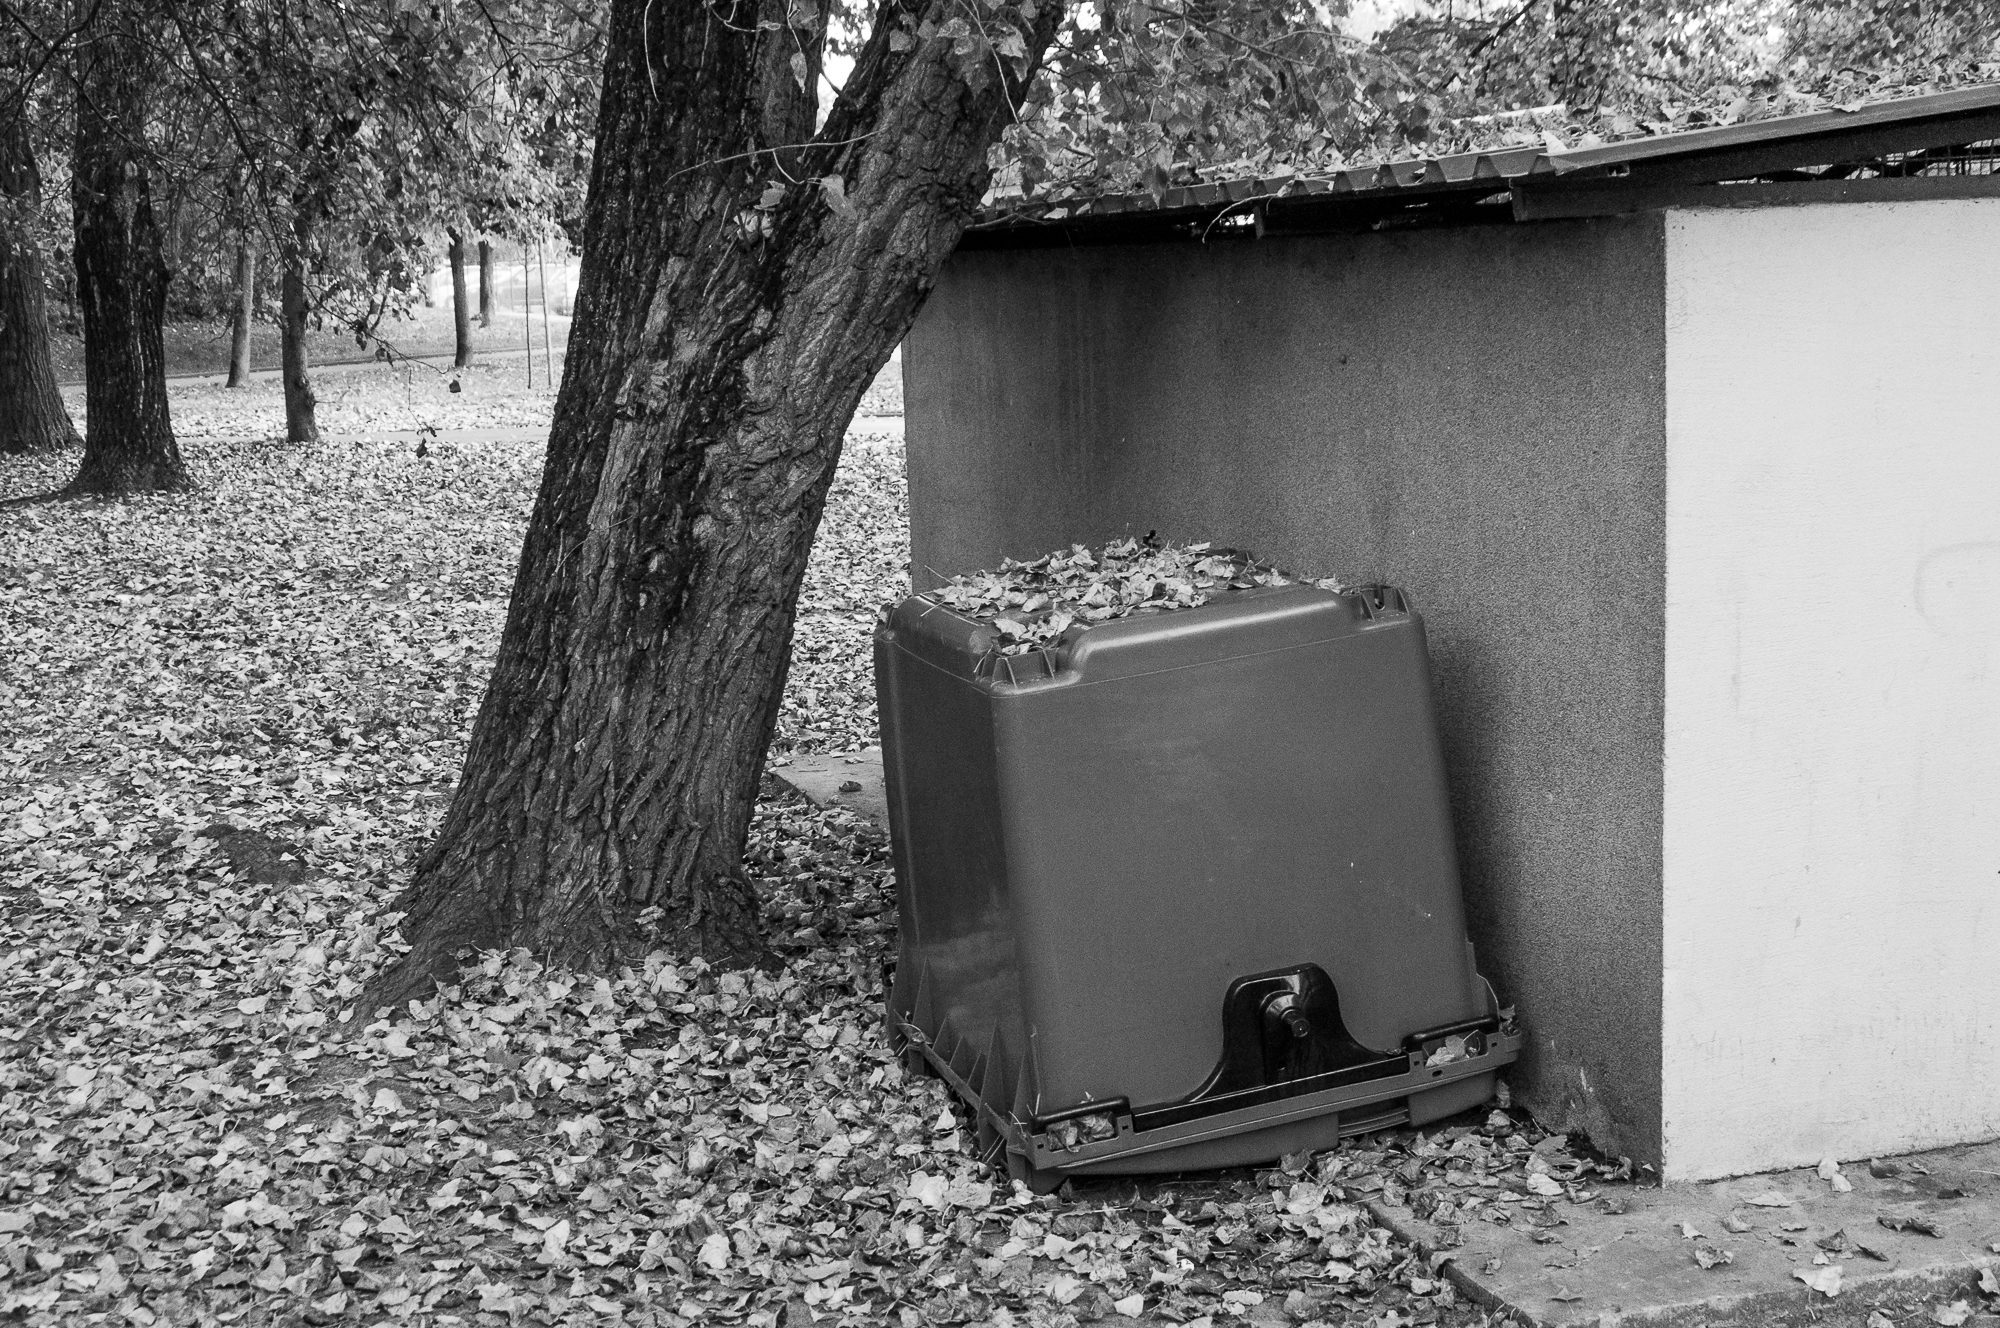 Adam Mazek Photography 2018. Warsaw Street Photography. Post: "Genius and stupidity know no boundaries of time or space." Minimalism.